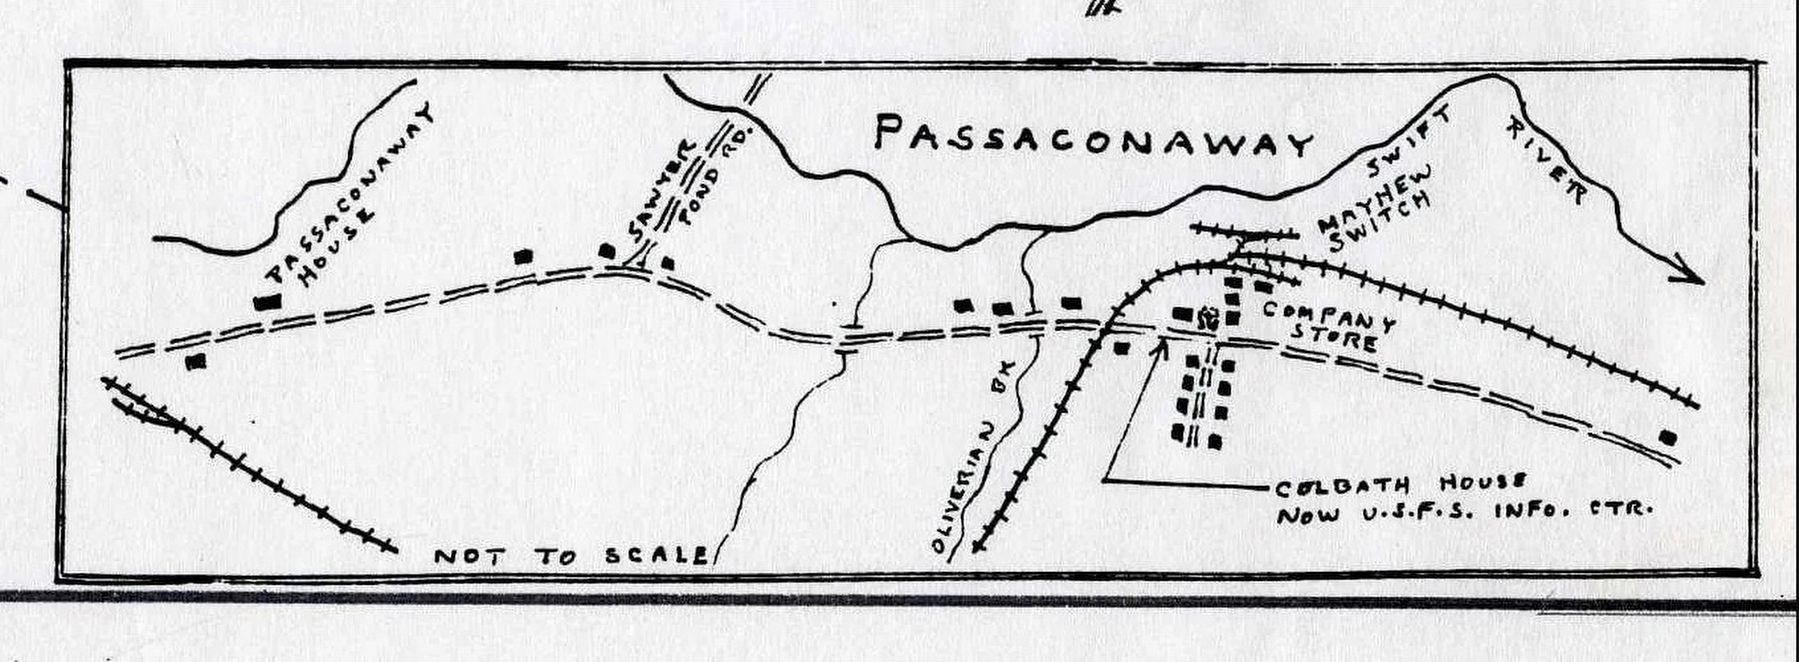 Passaconaway - The Albany Intervale image. Click for more information.